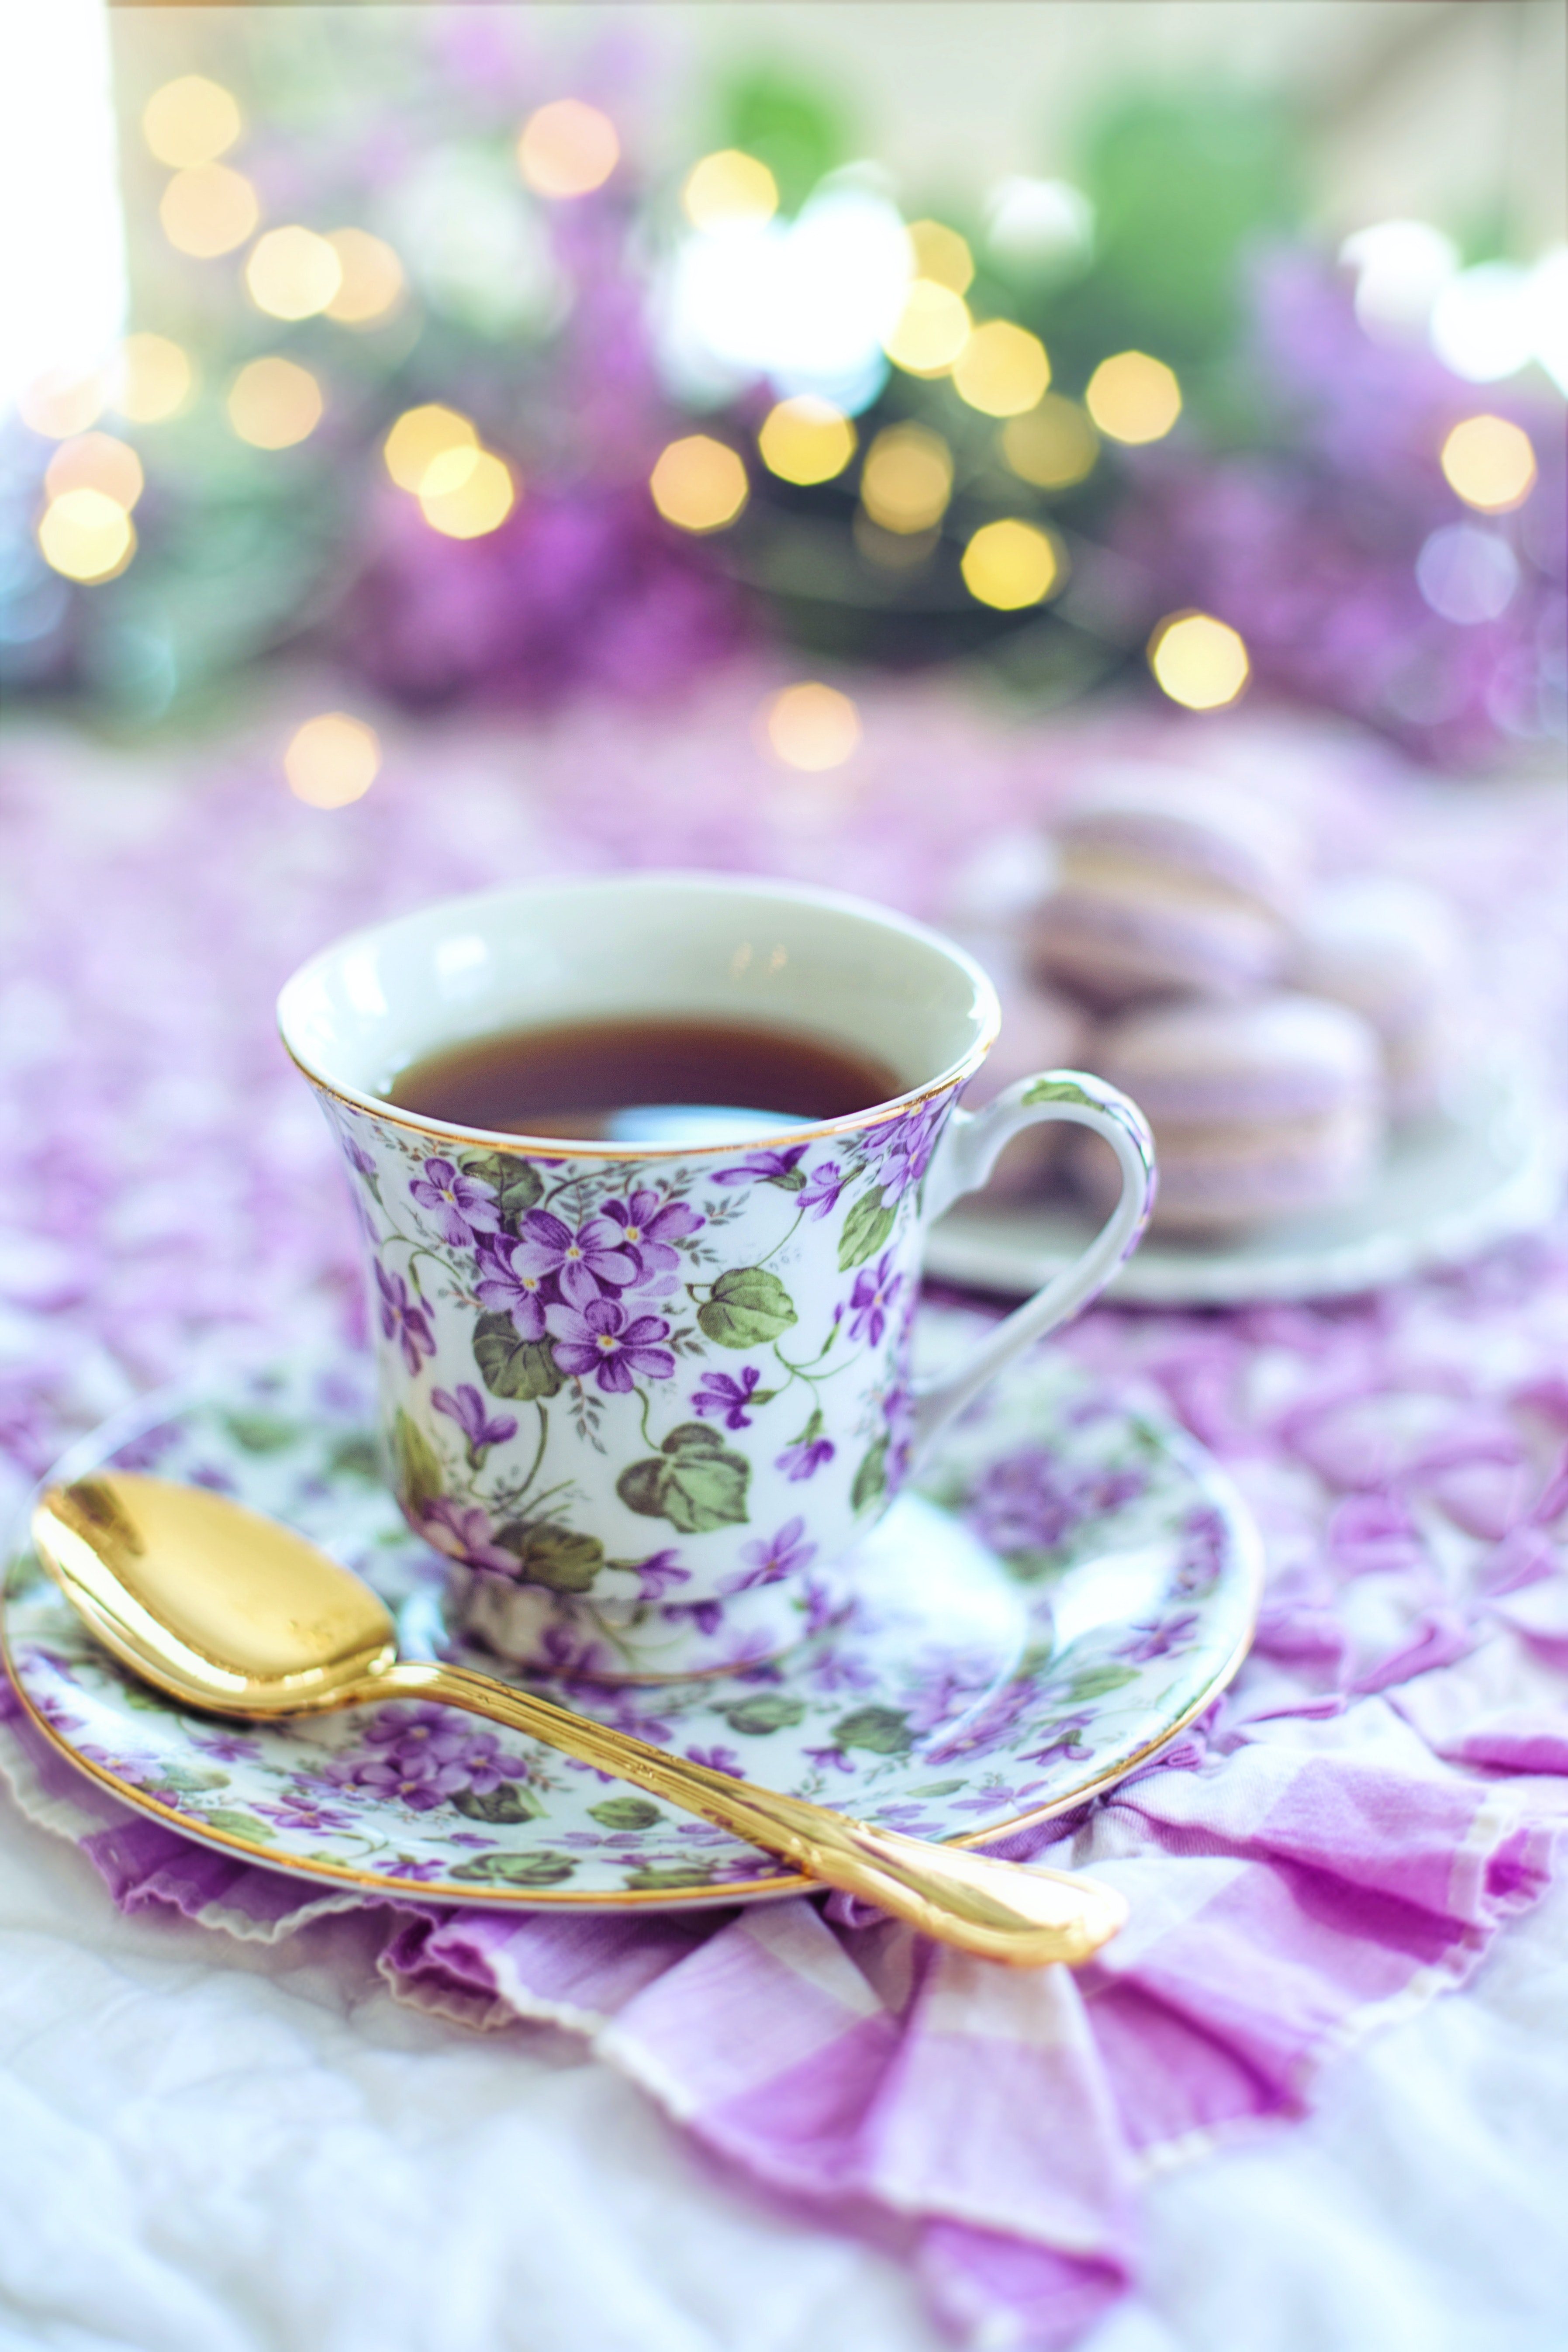 Ceramic or Porcelain Tea cup and plate with purple flowers on it and a golden spoon resting against the plate.  In the slightly blurred background is a plate of light pink macarons and sparkly lights.  